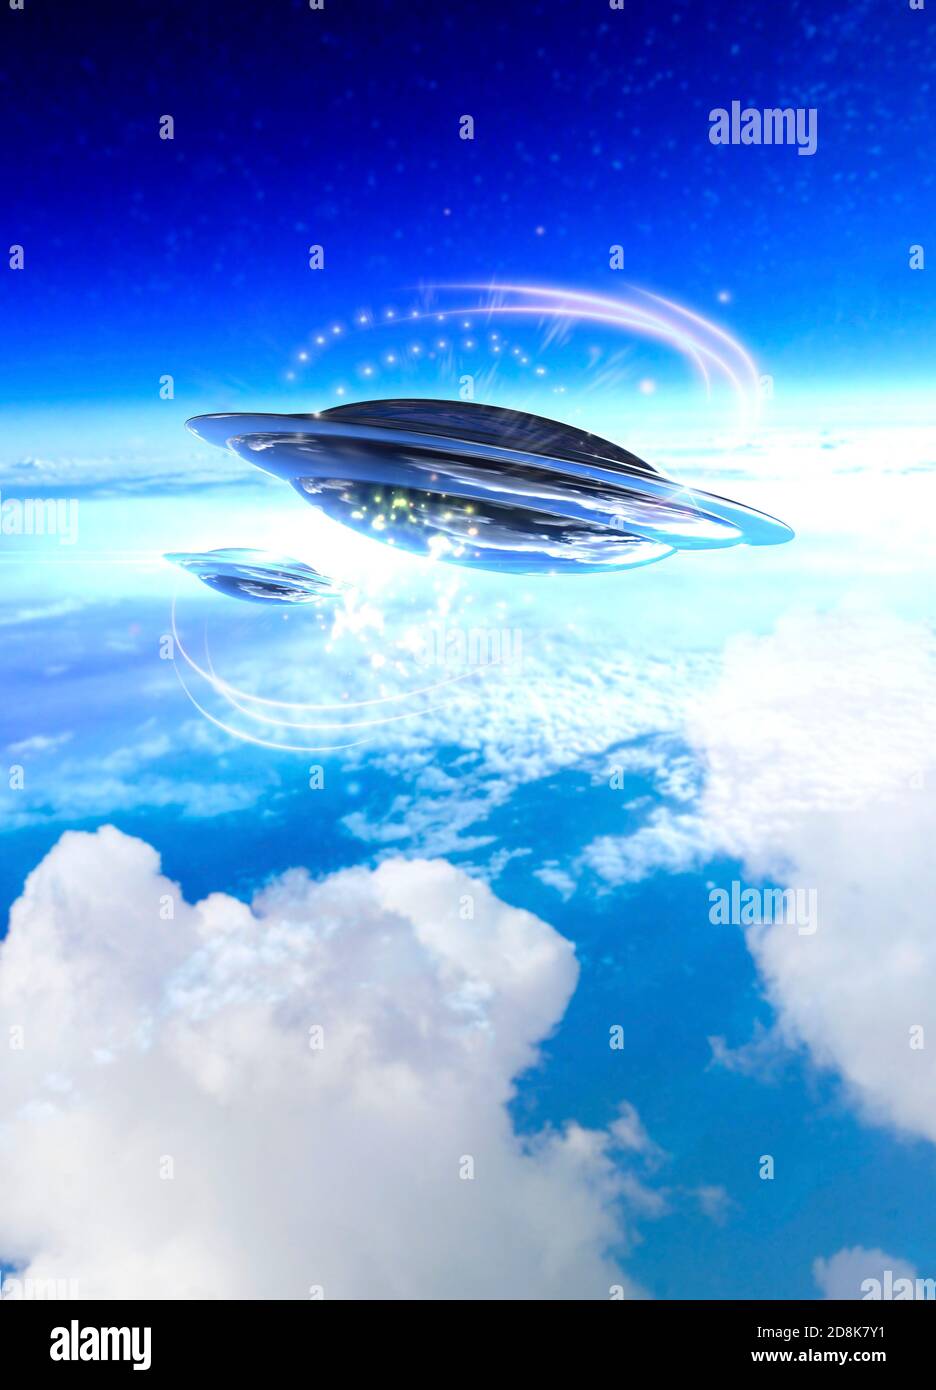 Unidentified flying objects (UFOs), illustration. Stock Photo